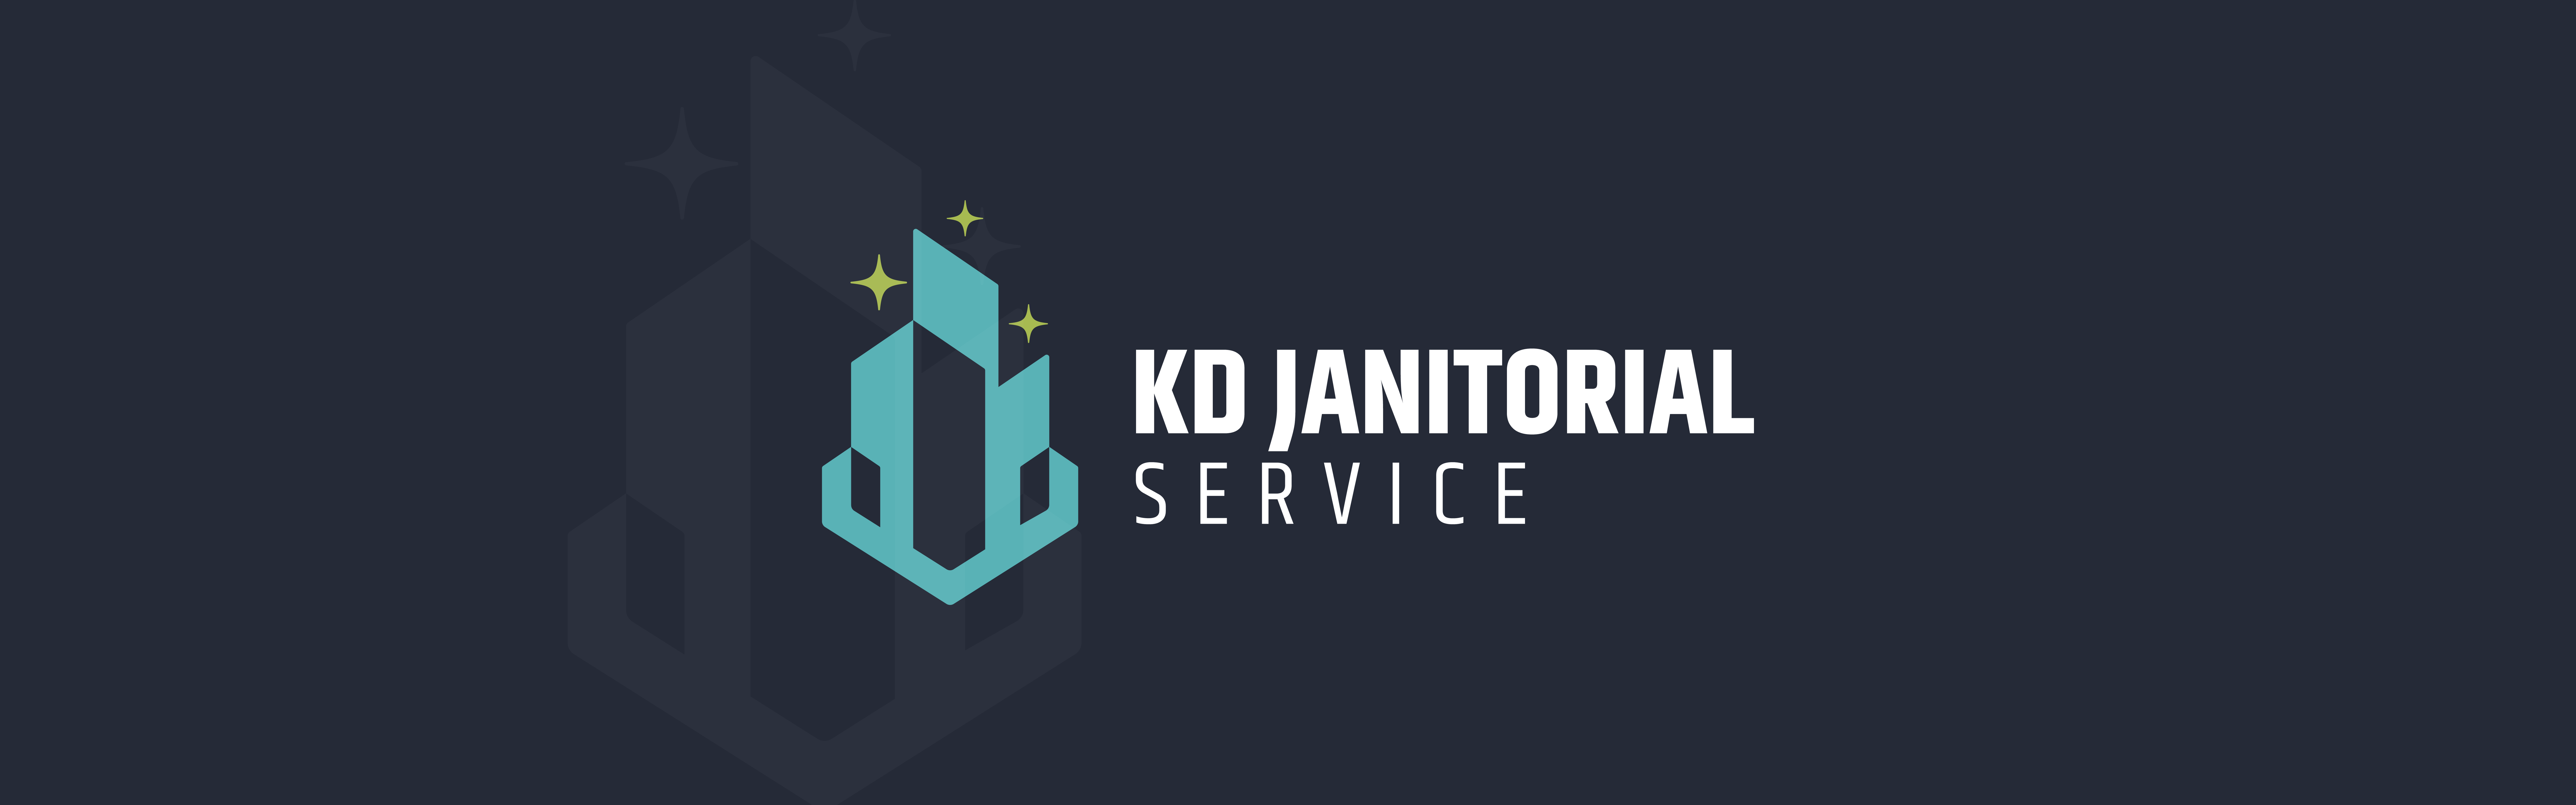 Logo of KD Janitorial Service featuring a stylized letter 'K' and 'D' within a shield shape, accented with stars and a cleaning tool, against a dark background.